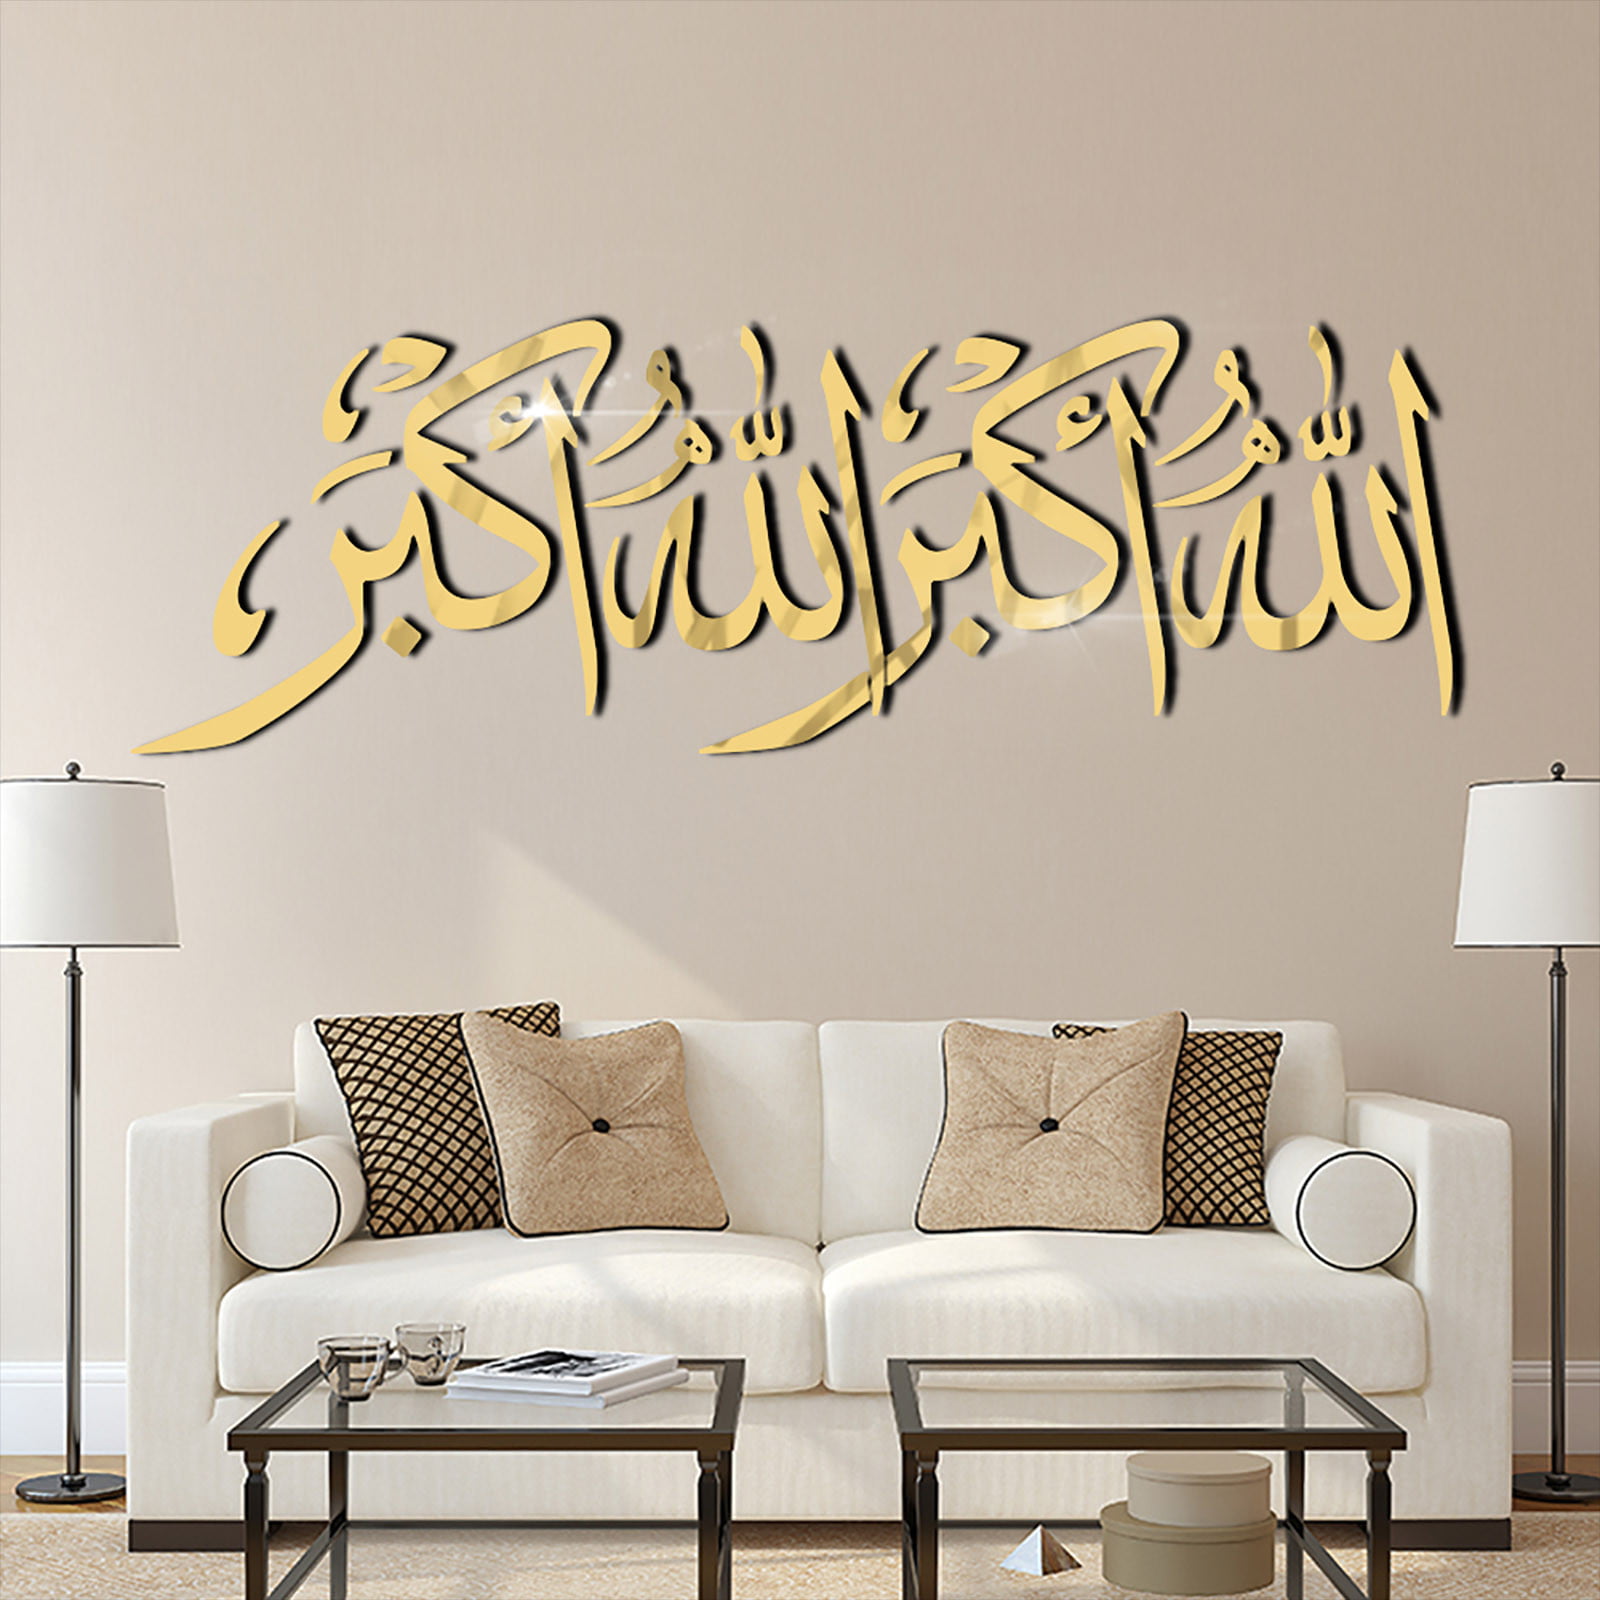 Muslim Acrylic Mirror Stickers Removable Wall Decal Art Home Living Room Decor 